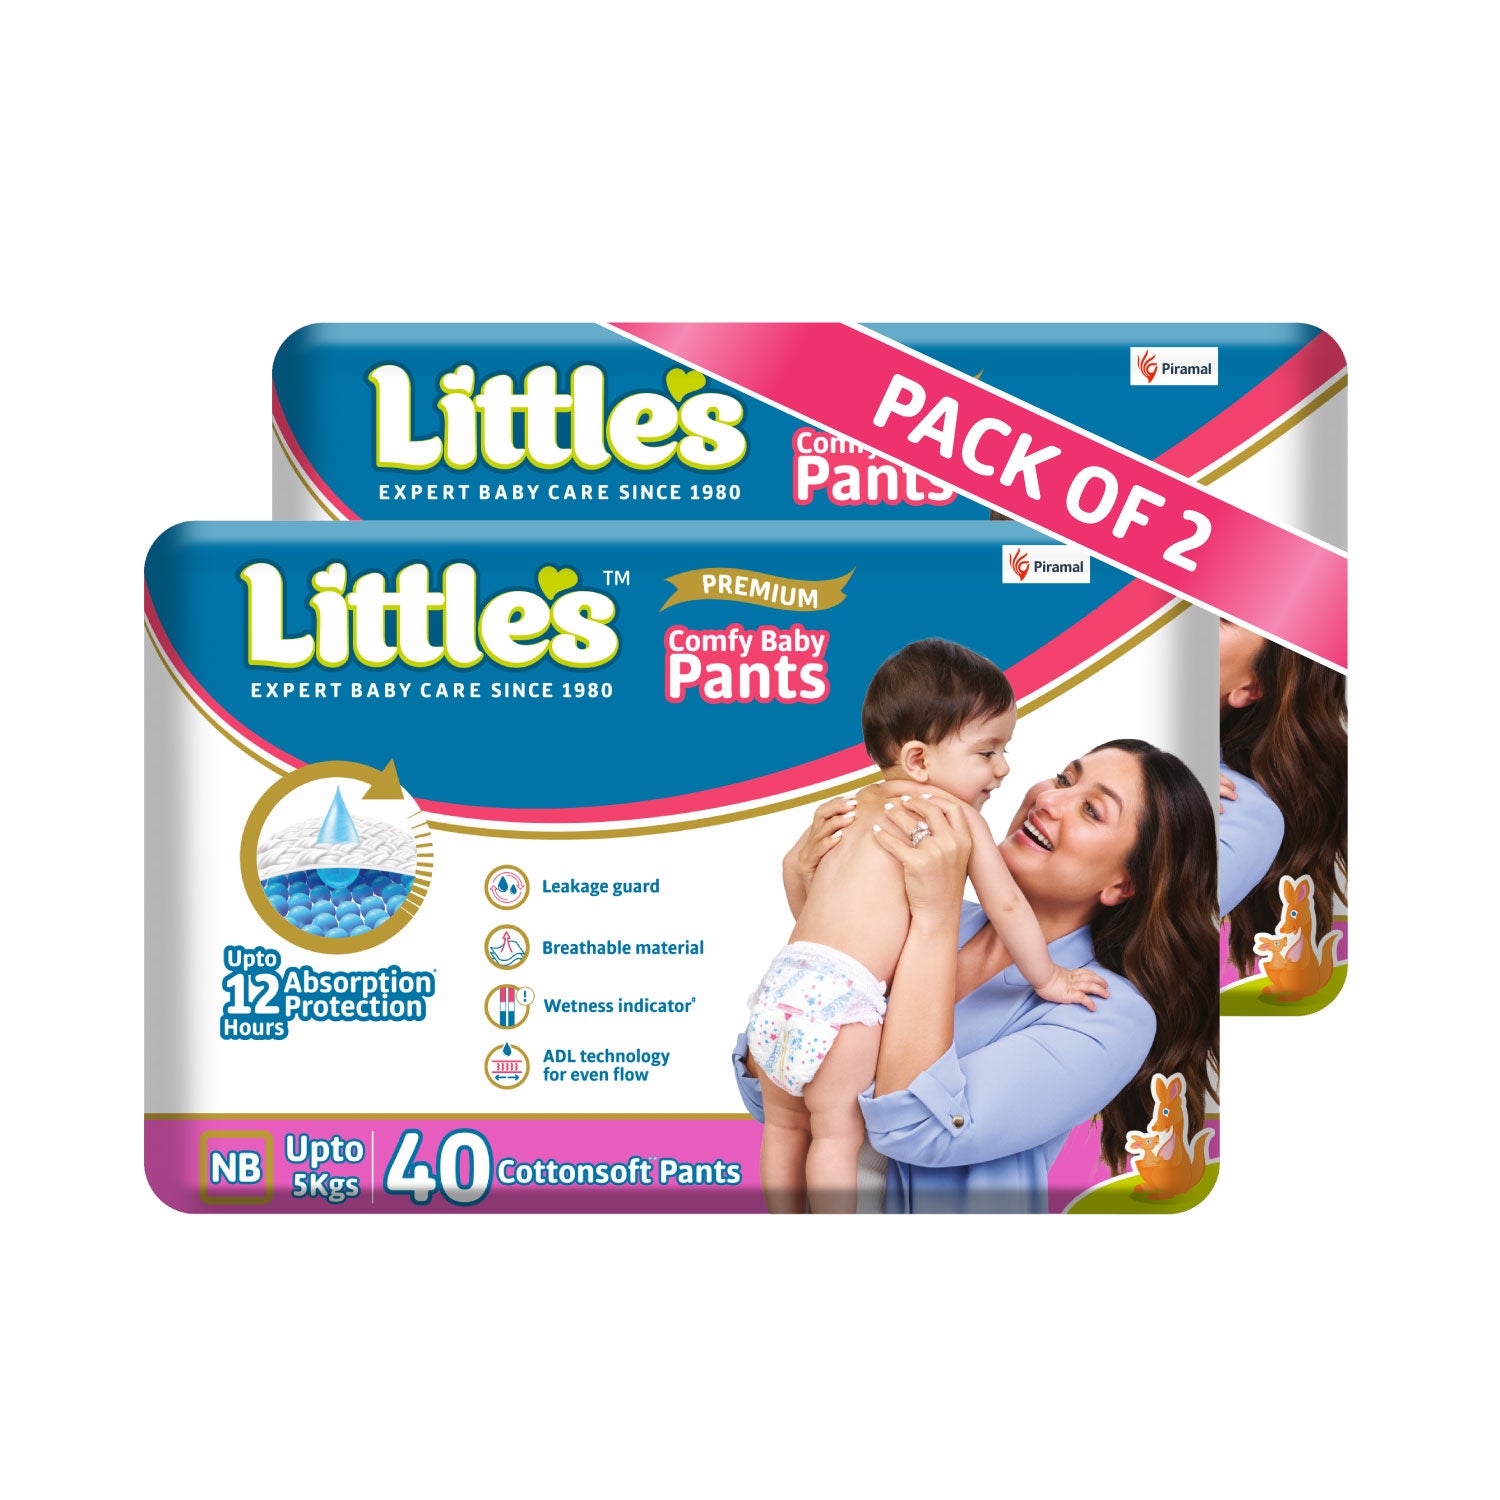 Little's Baby Pants Diapers with Wetness Indicator & 12 Hours Absorption, cottonsoft pants diaper new born pack of 2